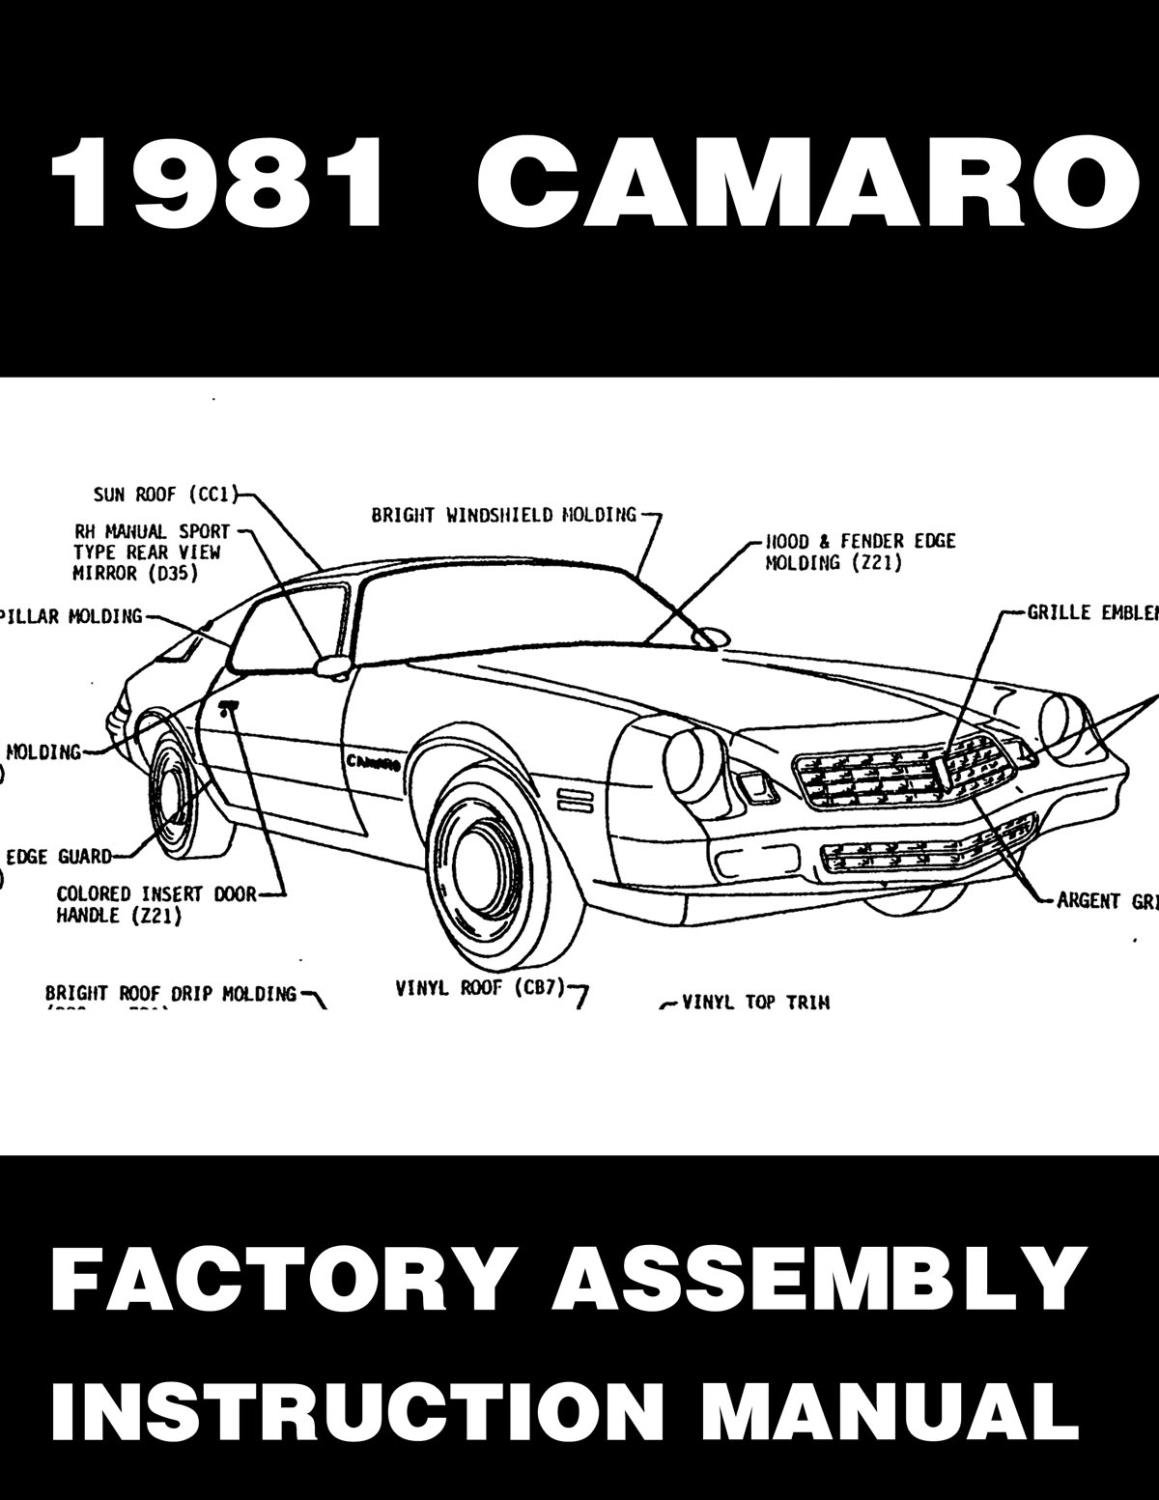 Factory Assembly Instruction Manual for 1981 Chevrolet Camaro